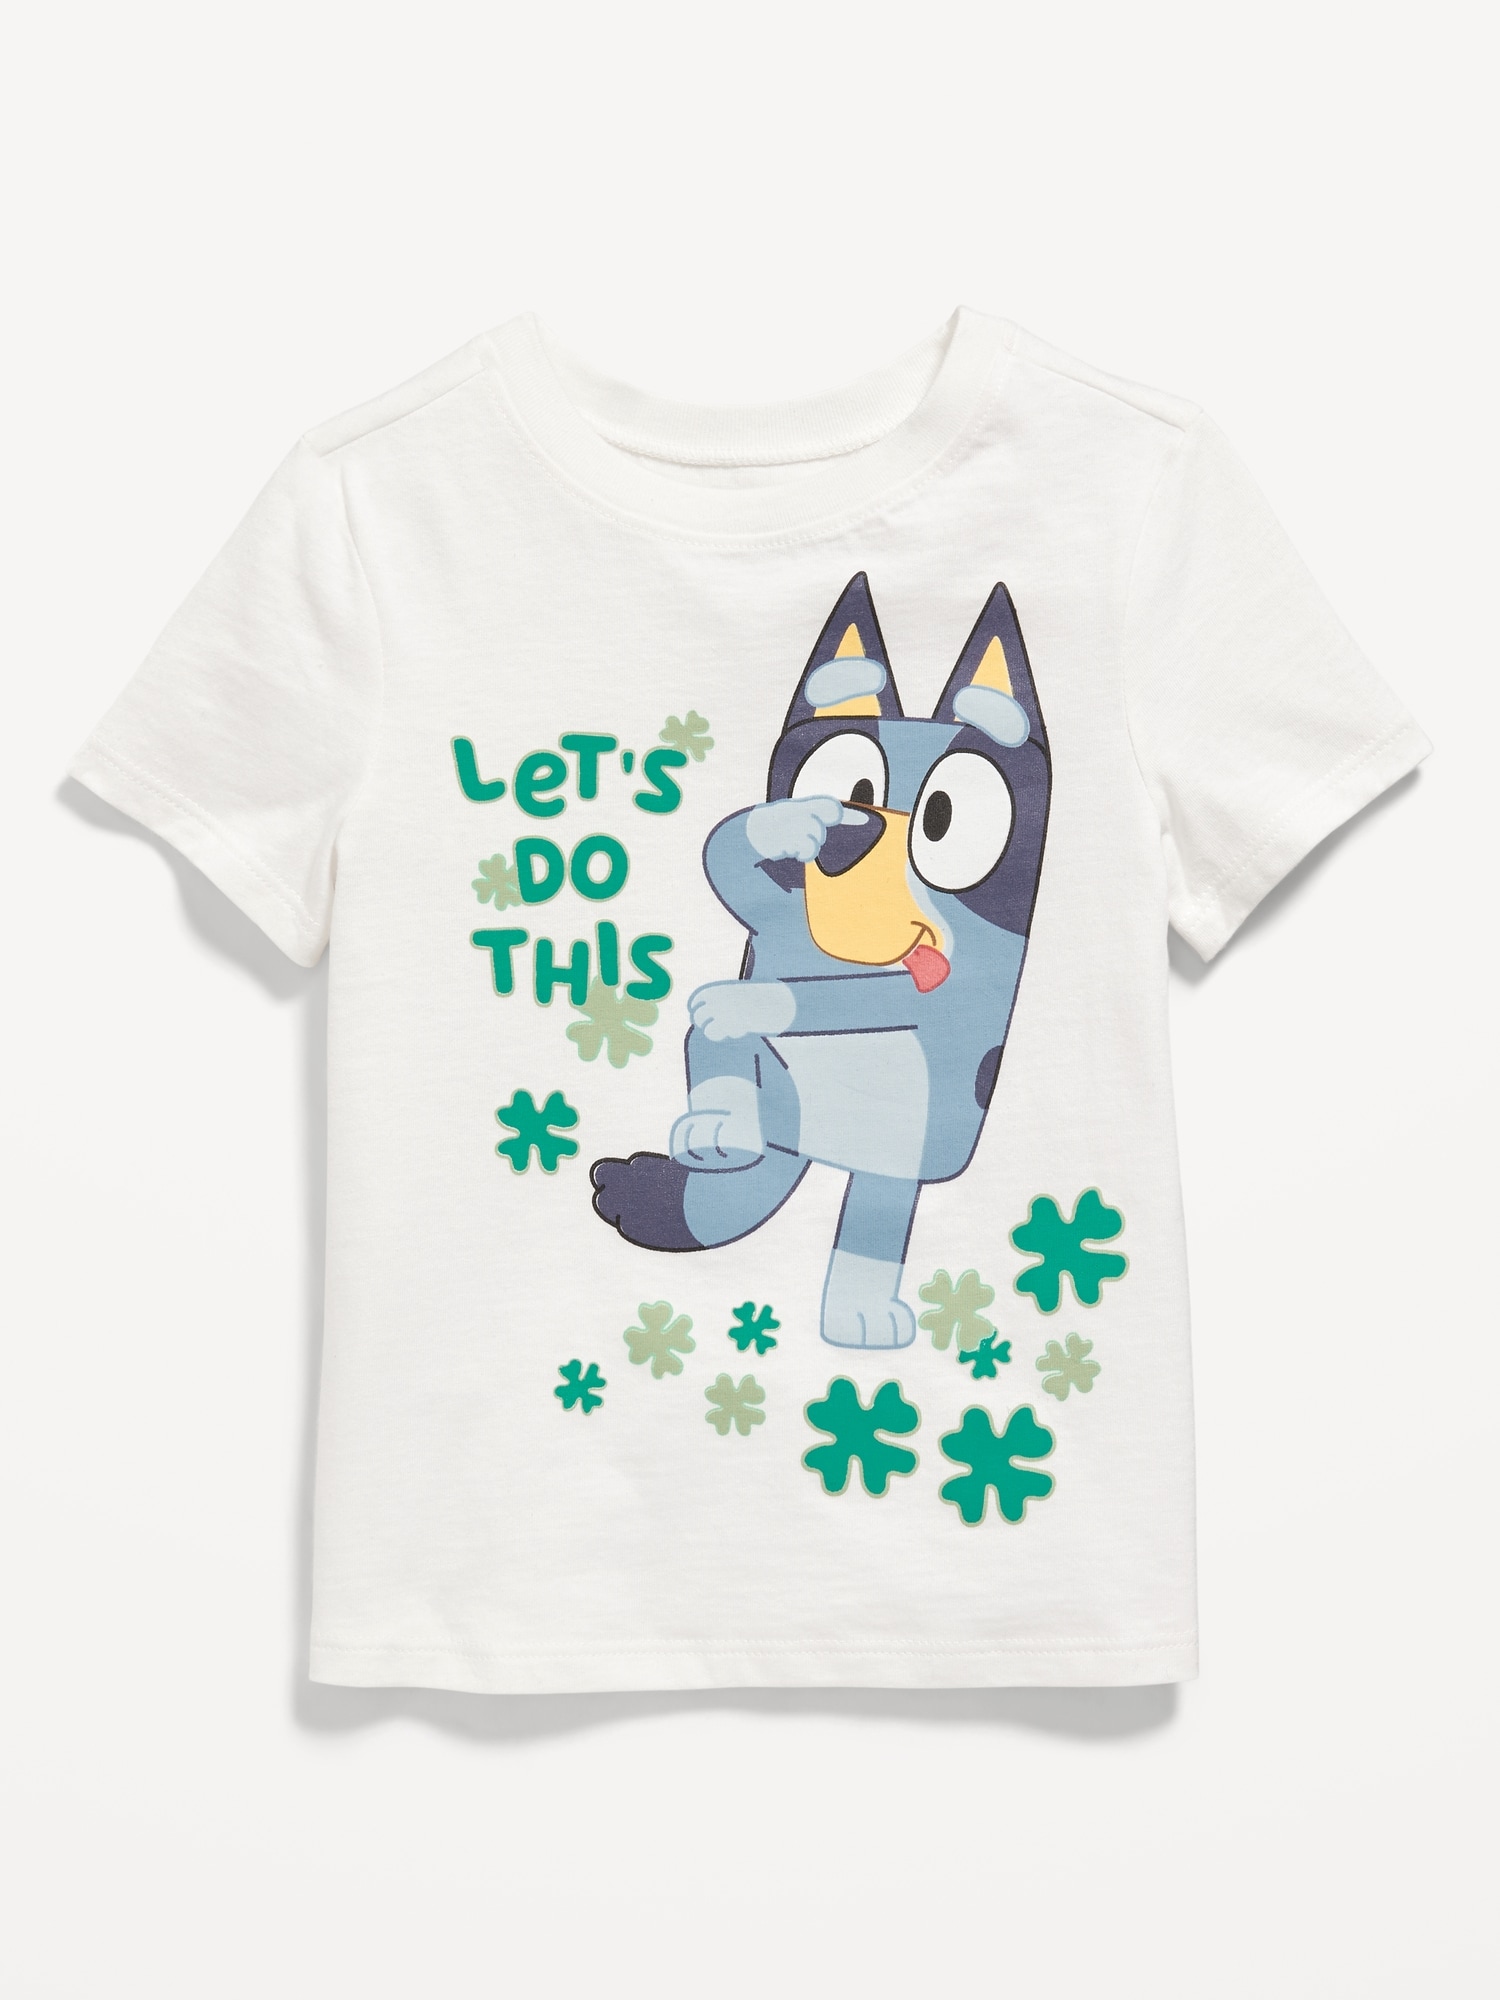 Bluey™ Unisex Graphic T-Shirt for Toddler